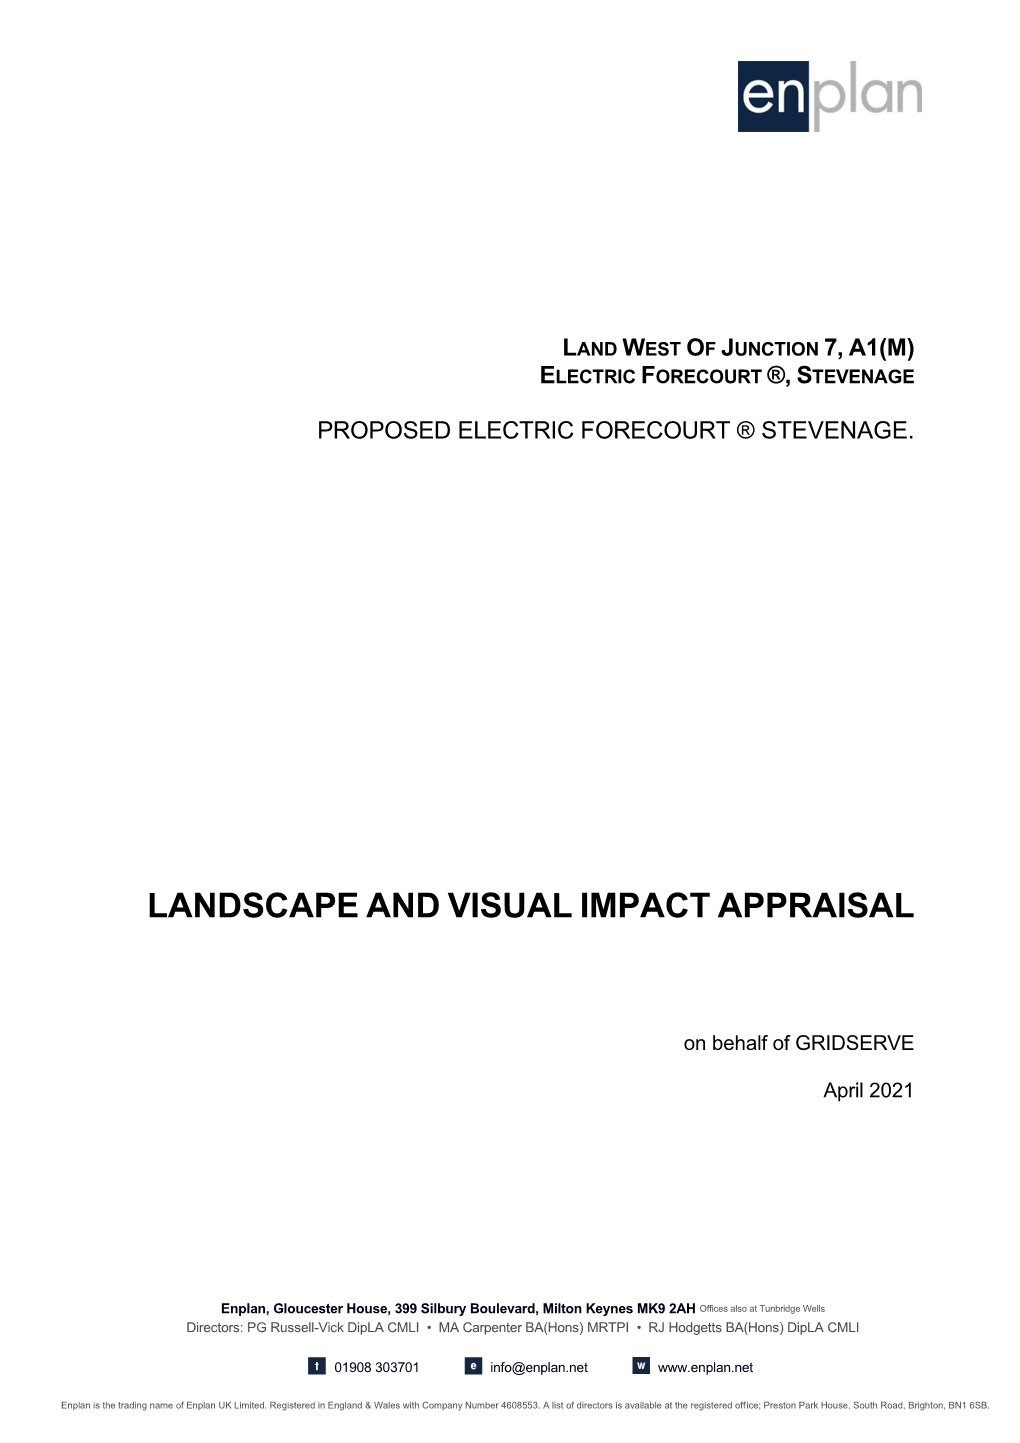 Landscape and Visual Impact Appraisal